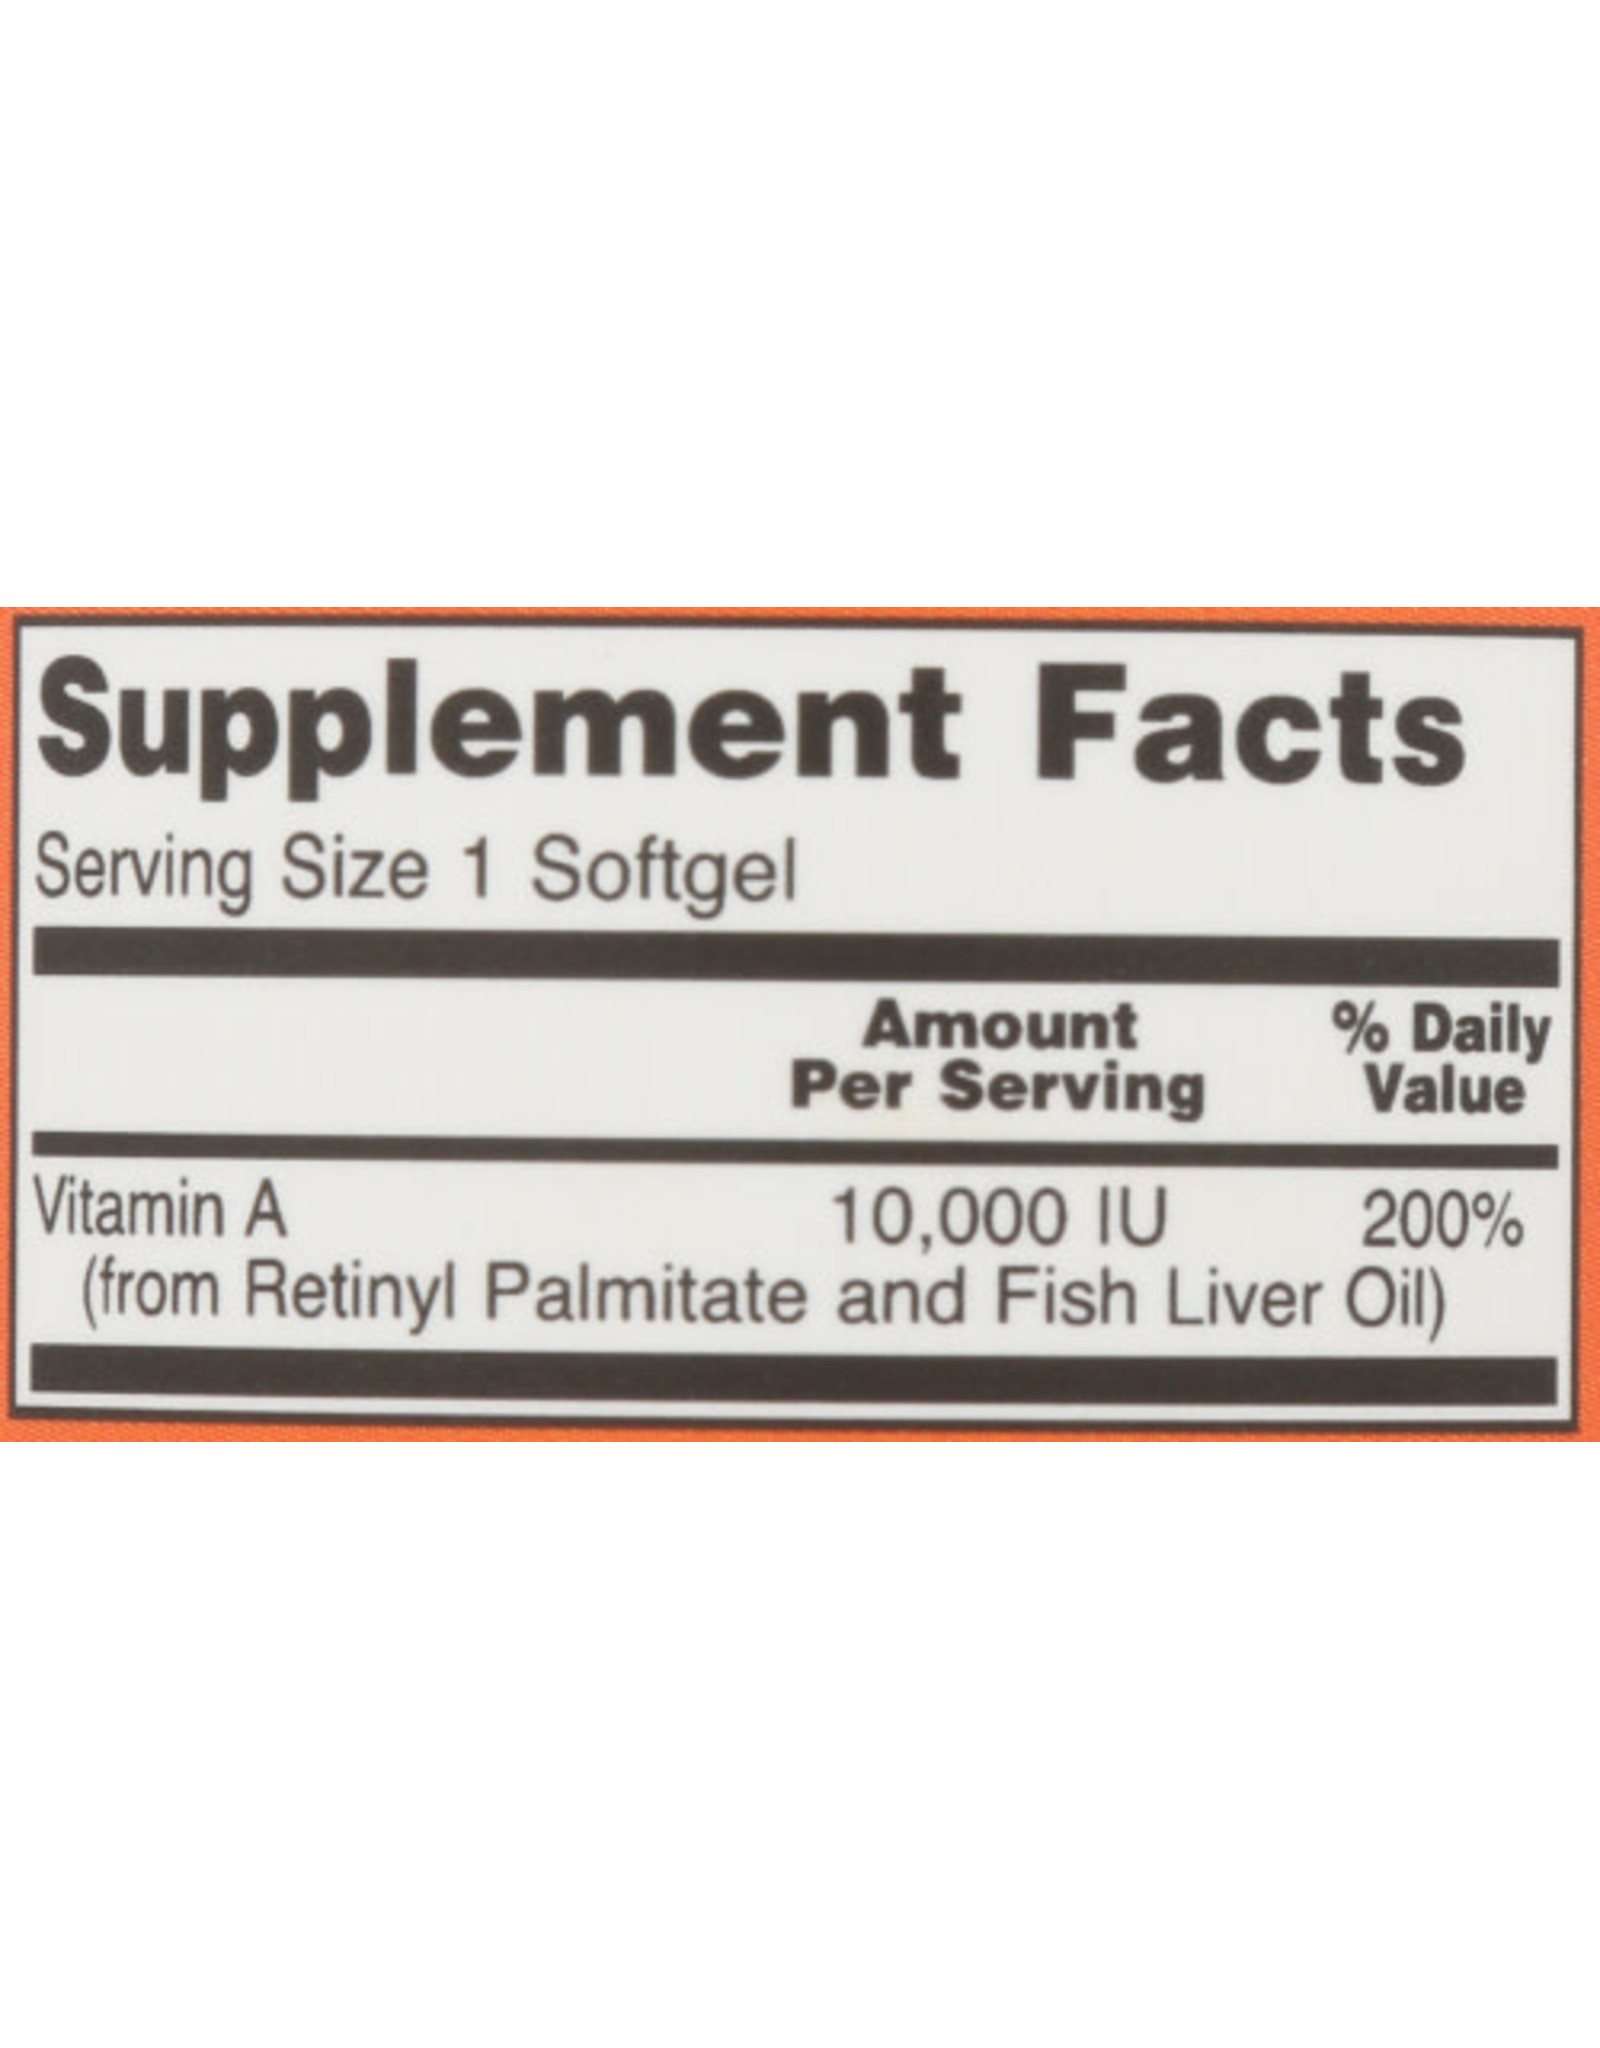 NOW® X Now Vitamin A 10,000 IU Essential Nutrition 100 Softgels